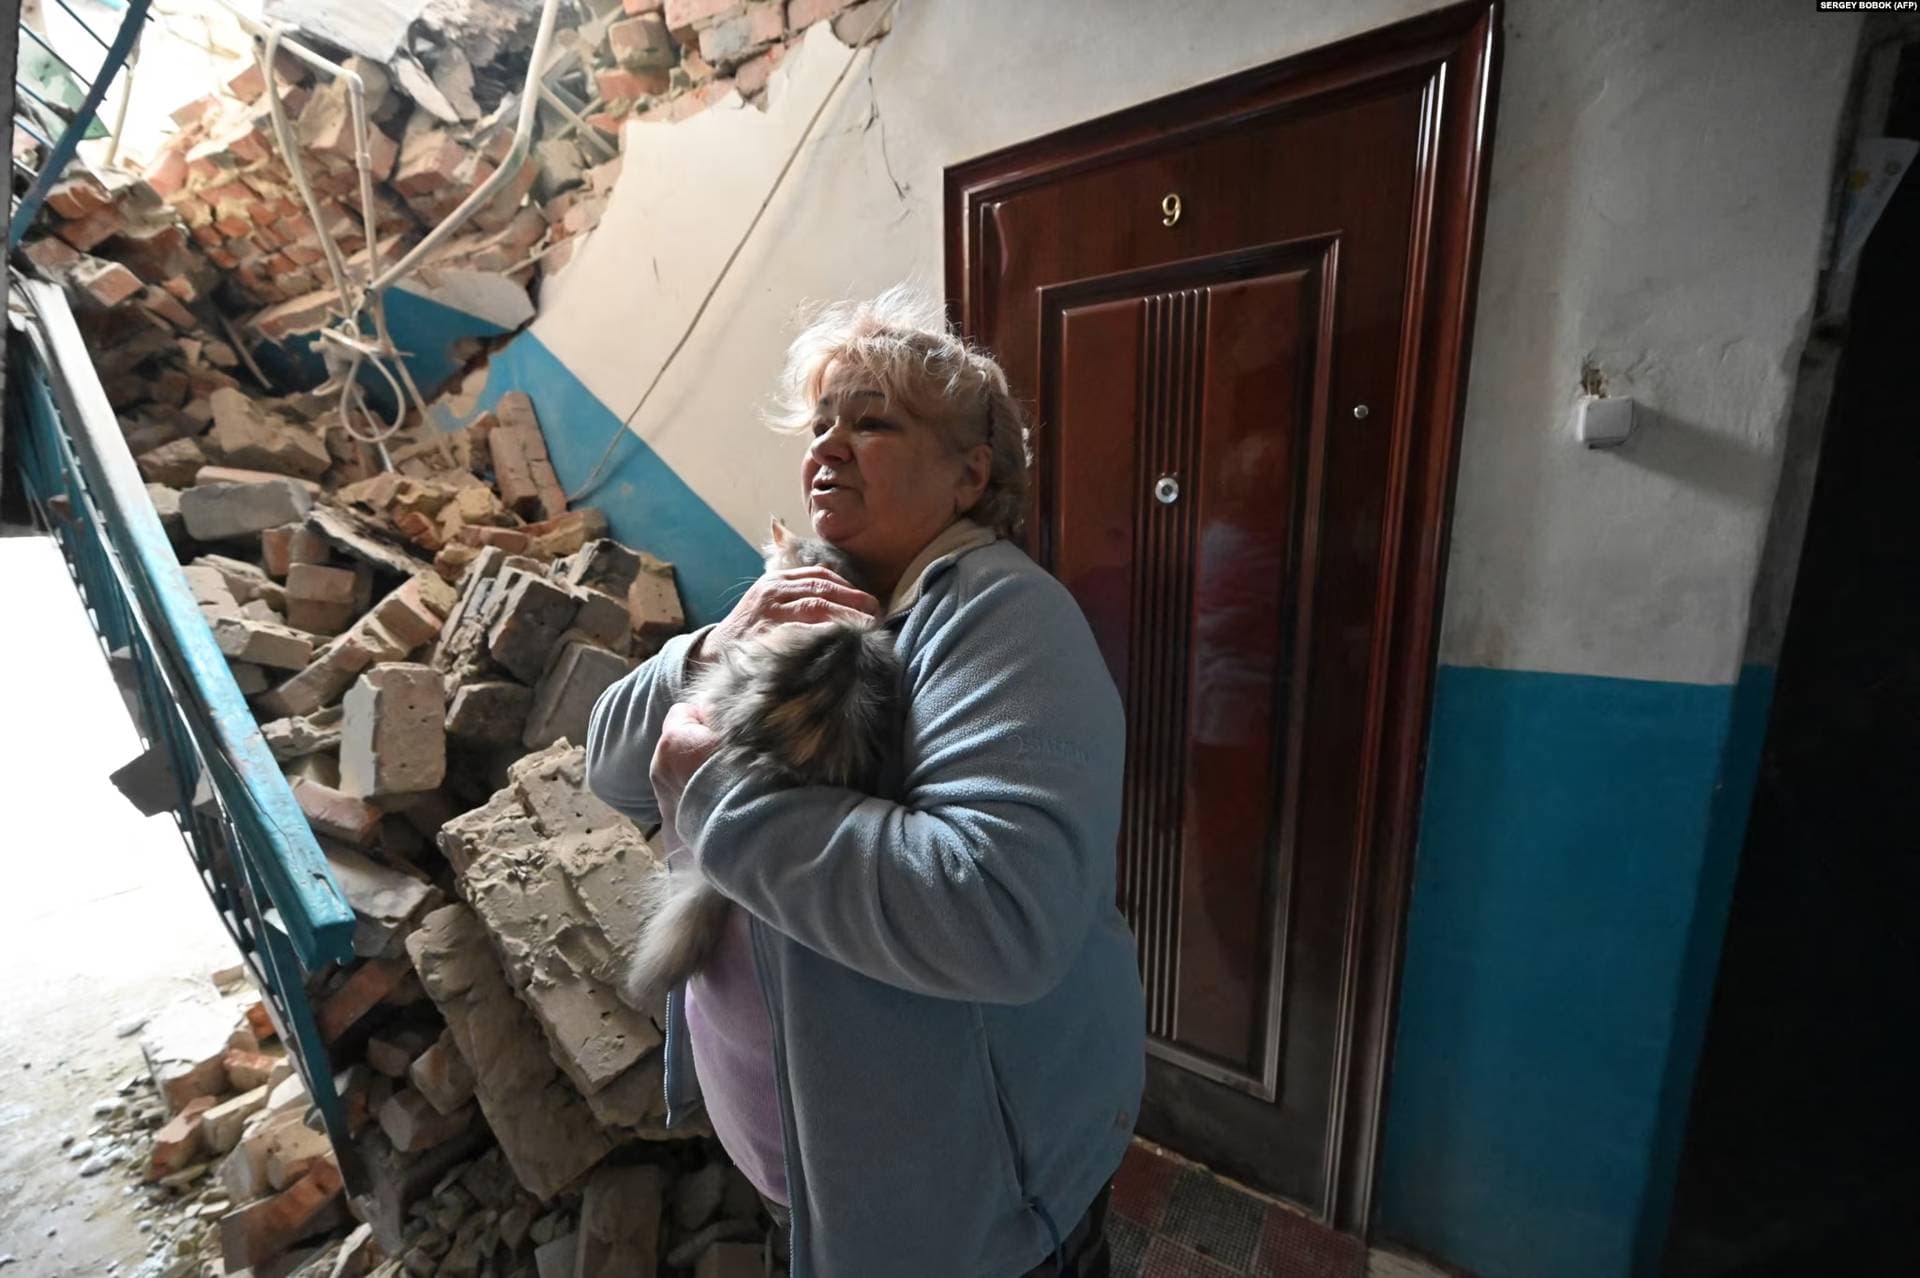 Tamara Skliarova, a 70-year-old resident, has remained in the city throughout. Her building was shelled and the stairs to the upper story are now blocked by debris